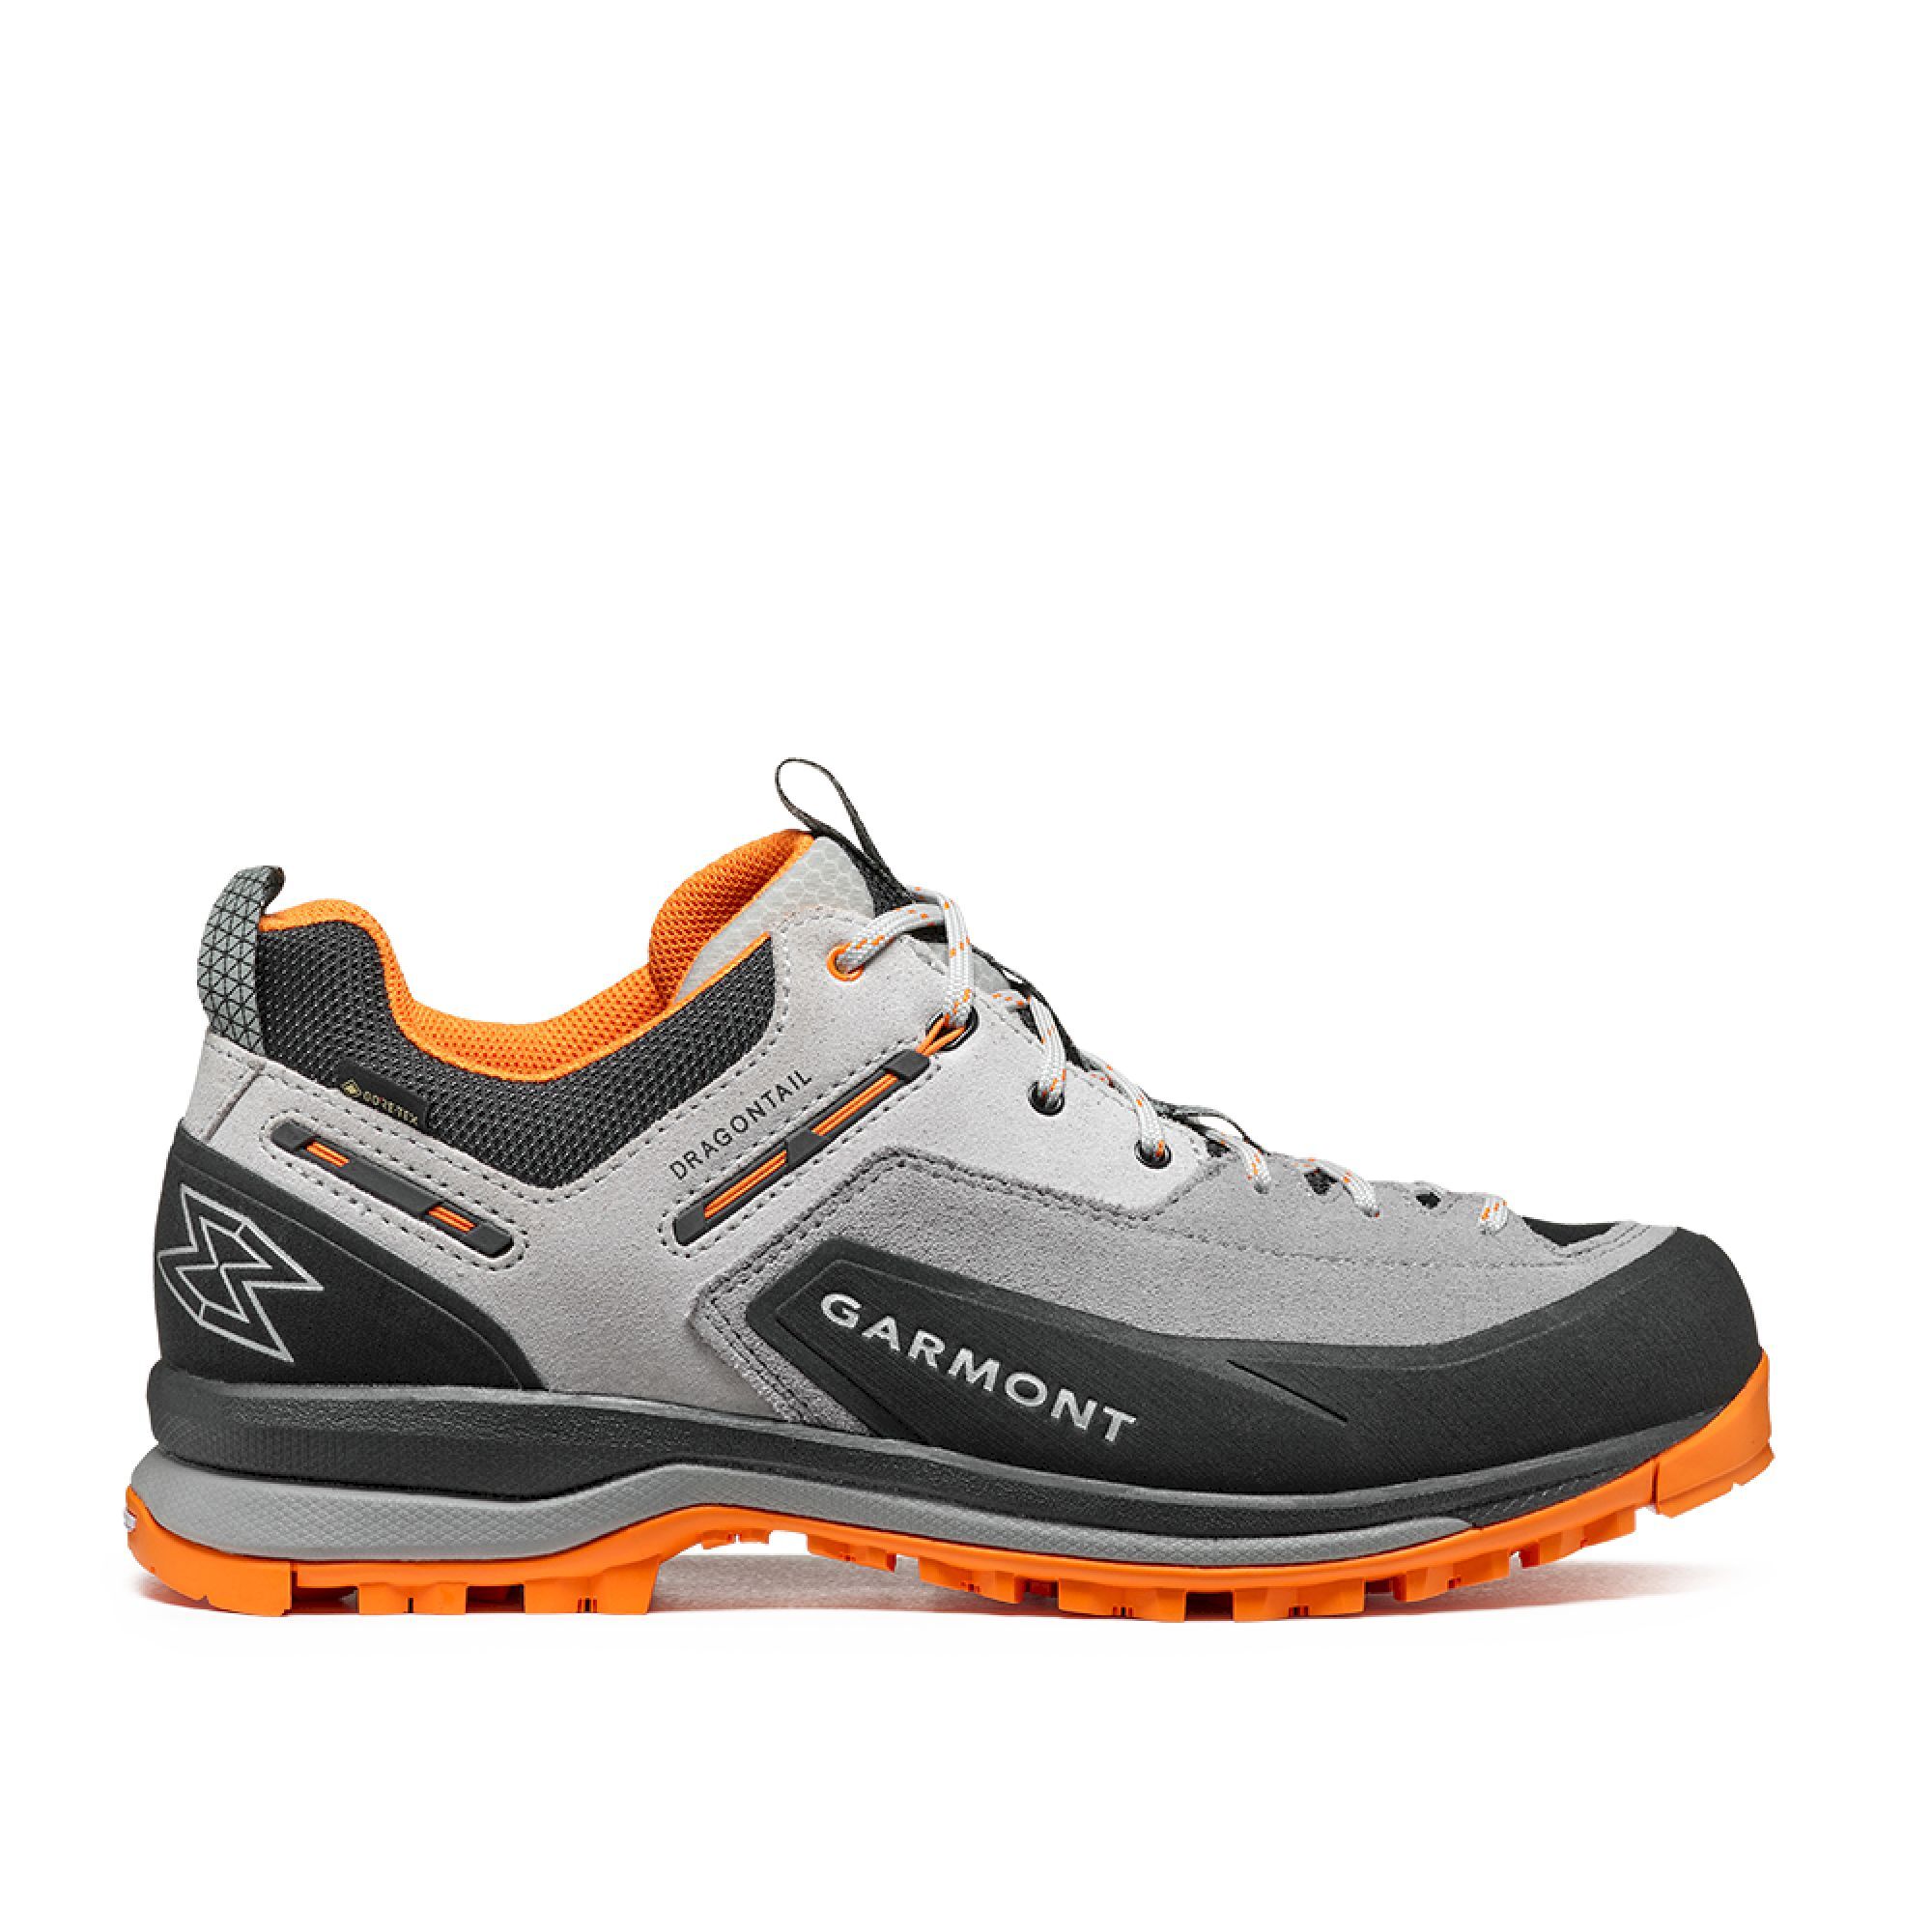 Garmont Dragontail Tech GTX - Limited Edition - Approachsko | Hardloop